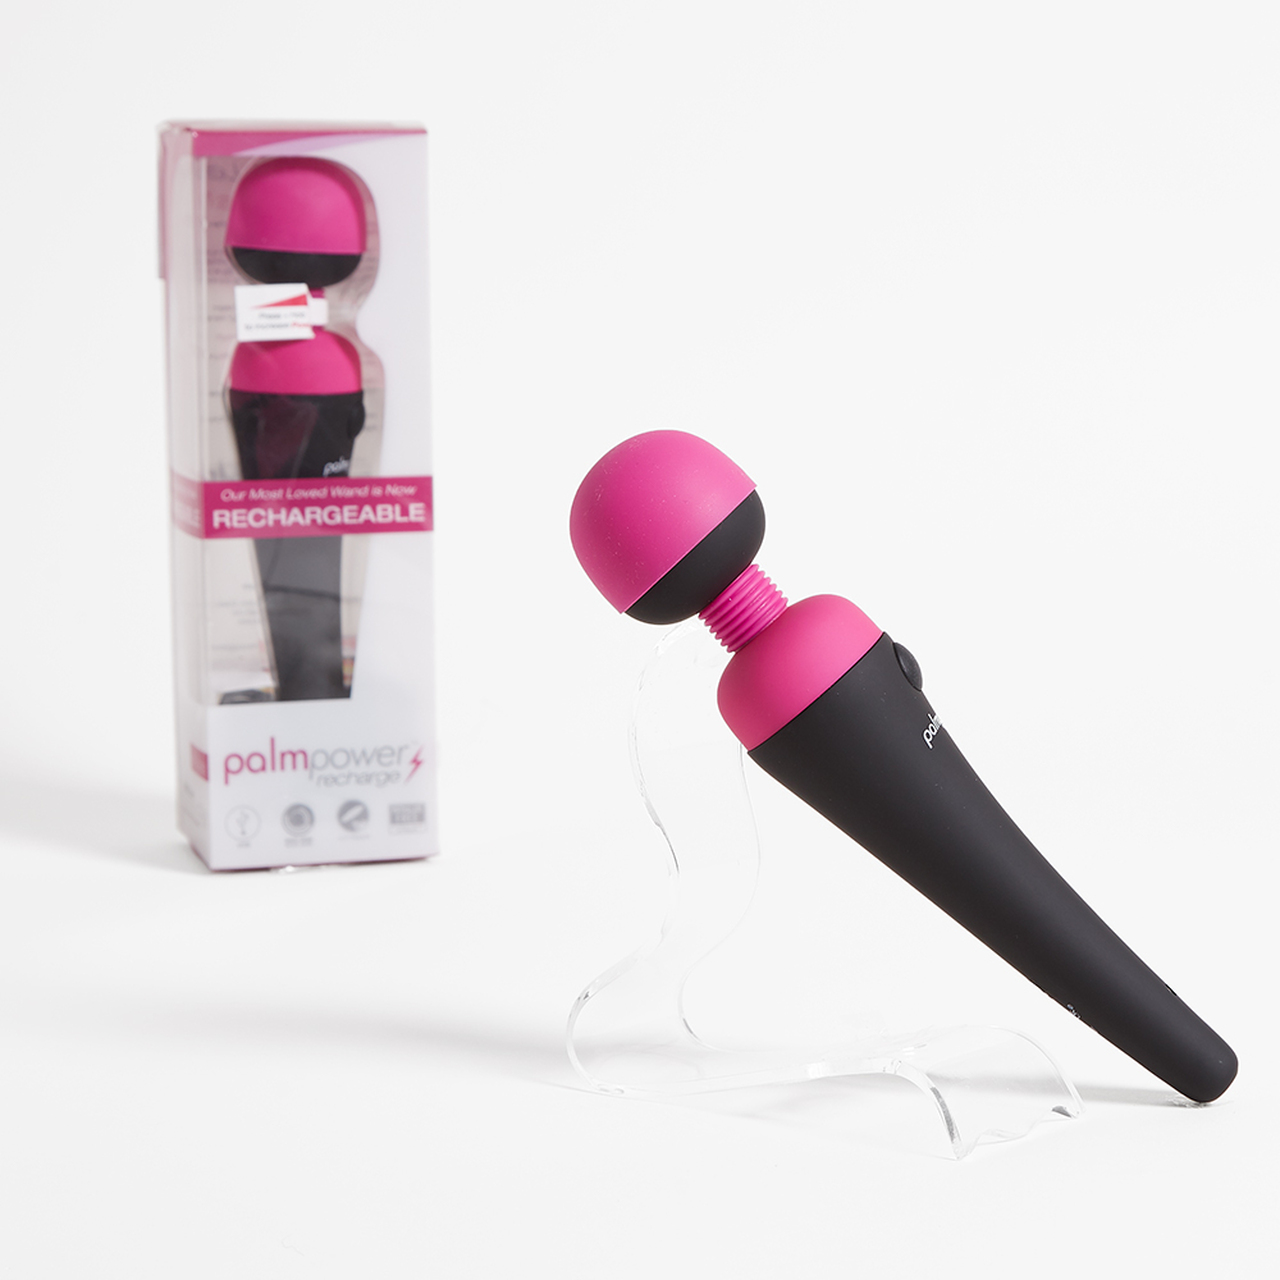 Rechargeable PalmPower Personal Massager